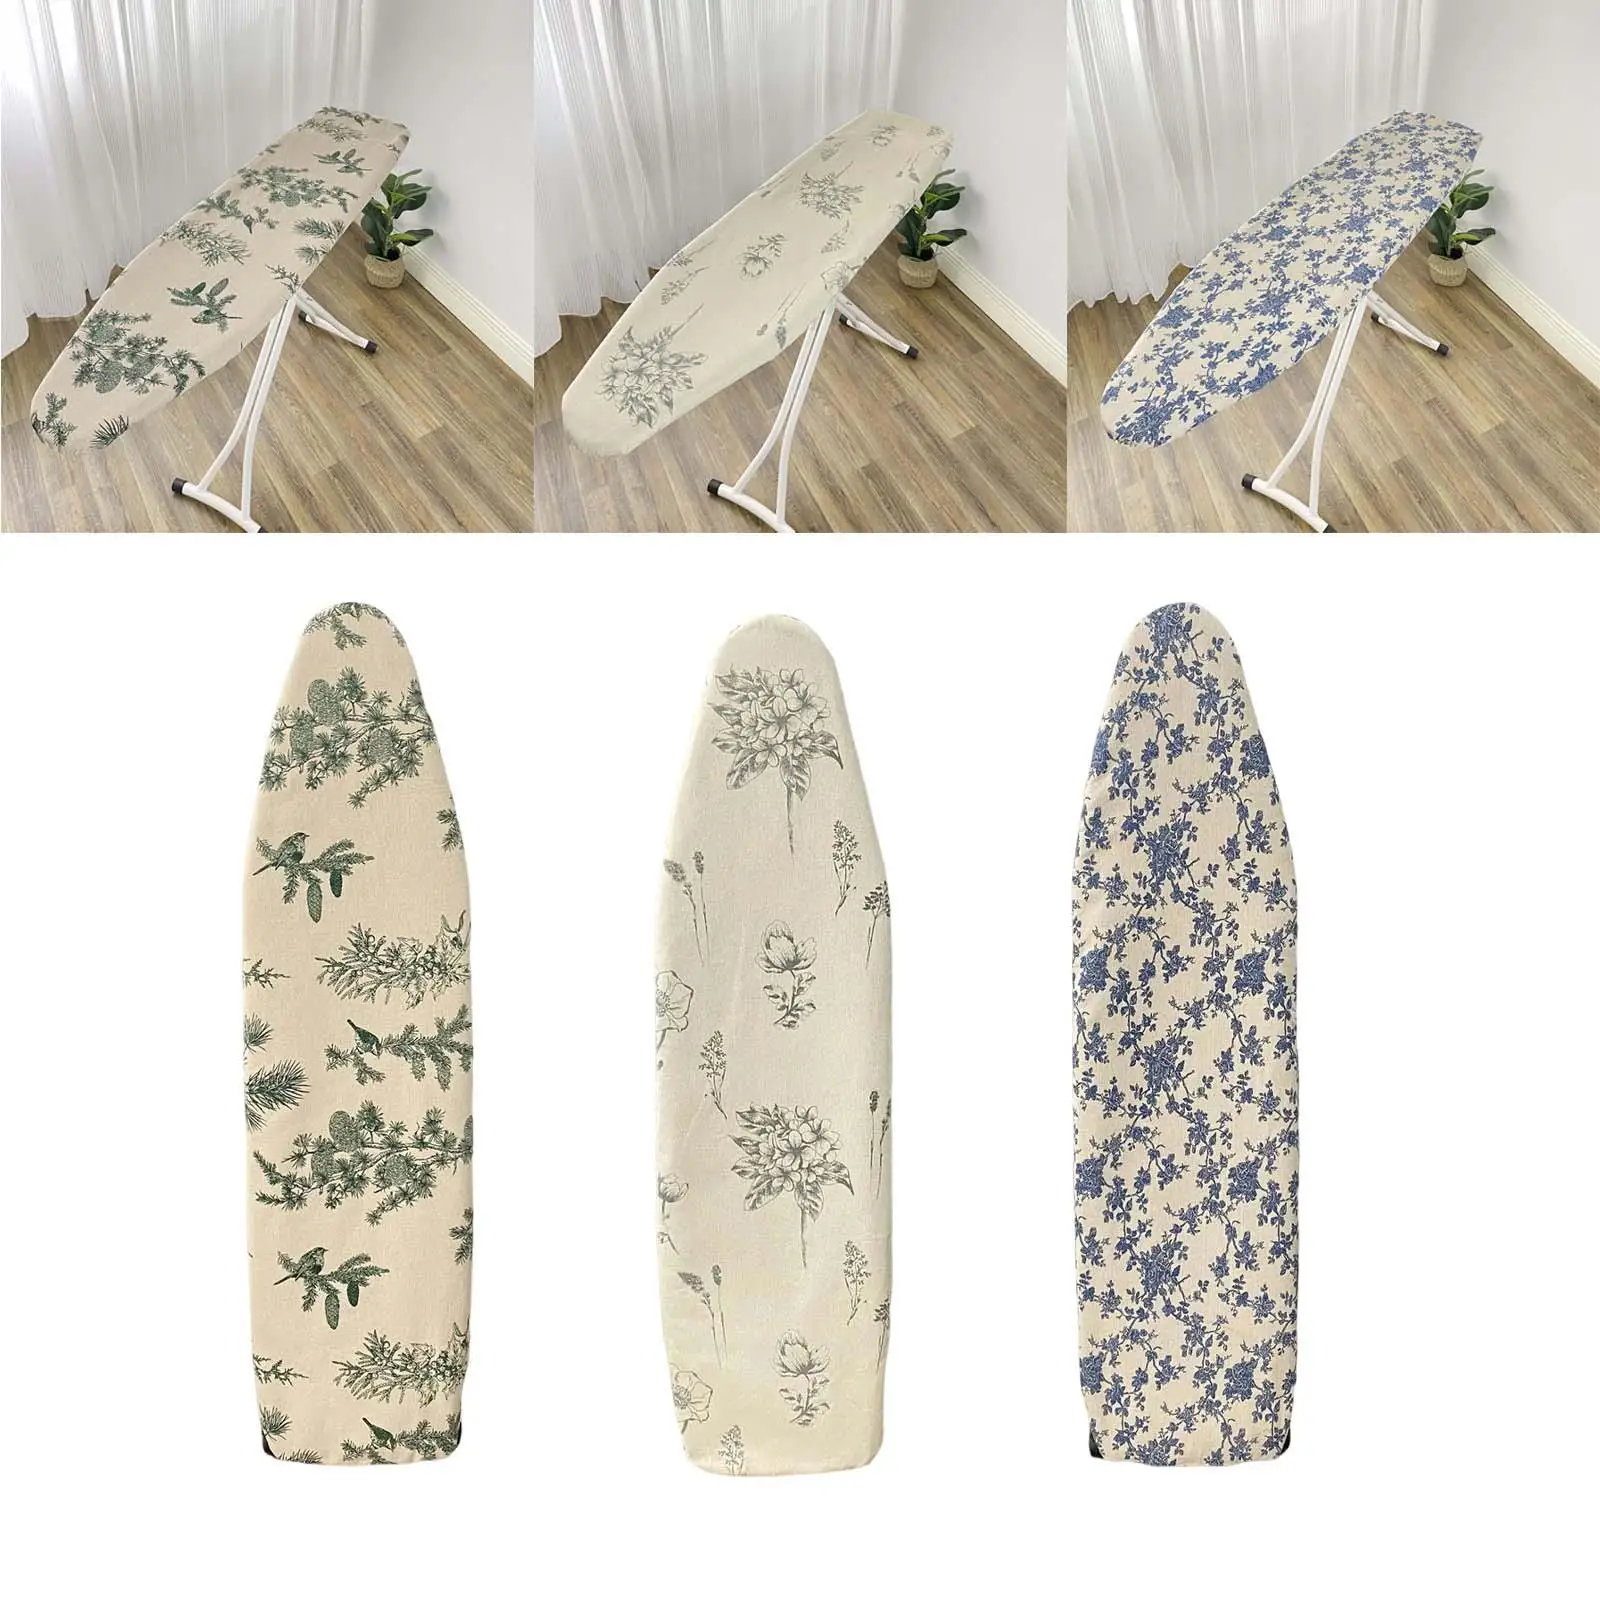 Ironing Table Cover Protector Easy to Install Foldable Durable Washable Reusable Ironing Board Cover for tools